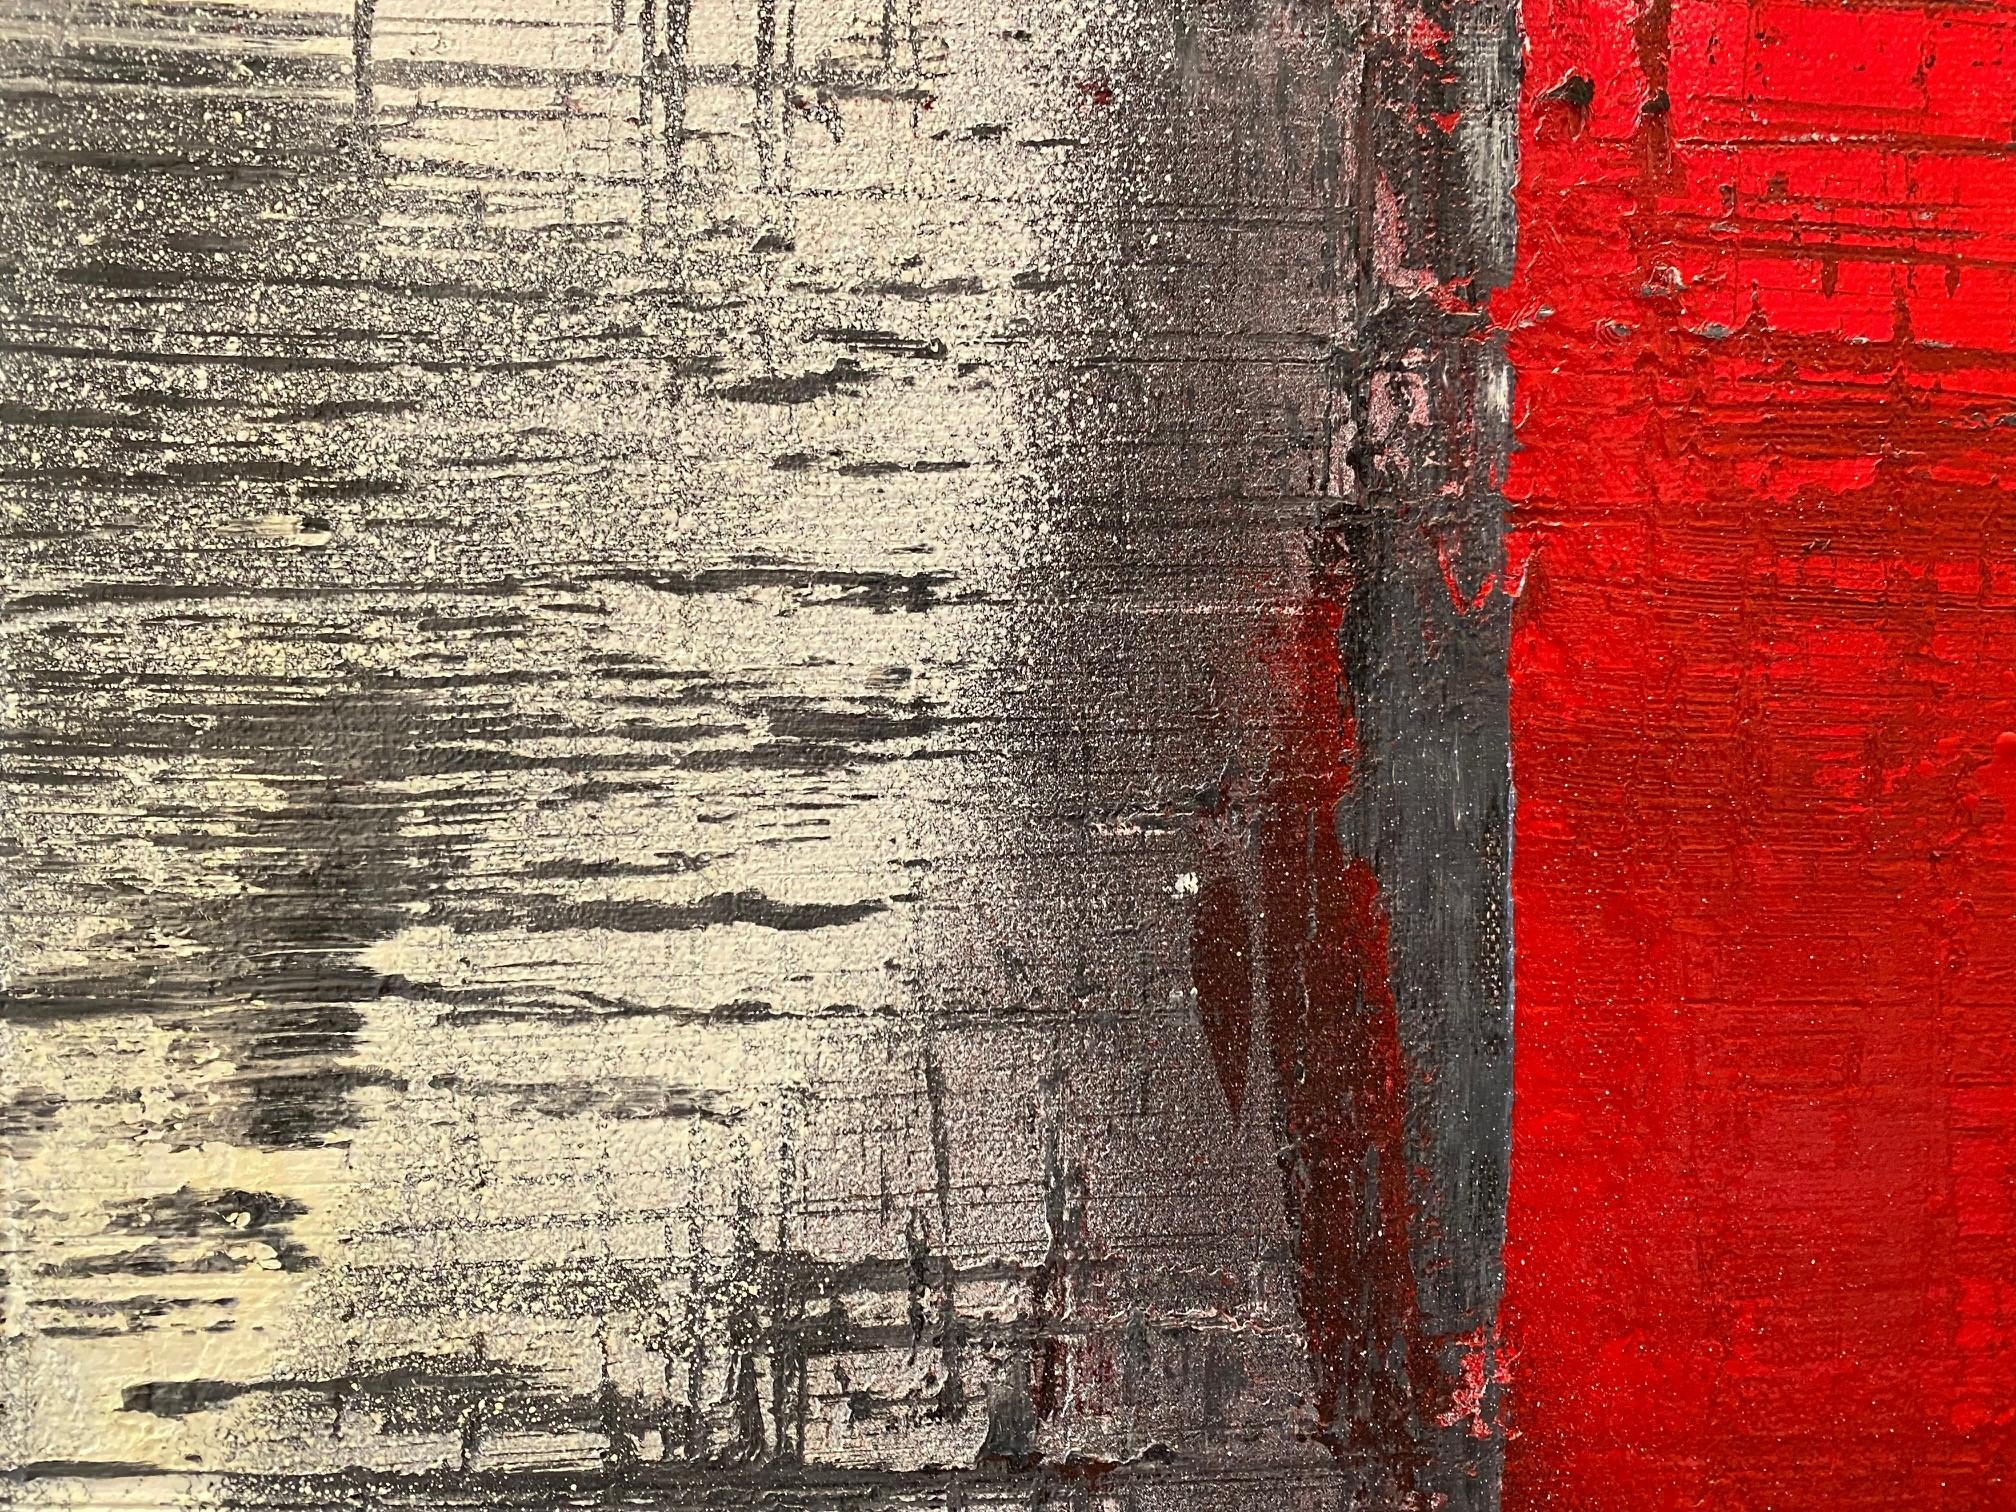 The canvas pulsates with energy, as bold strokes and intricate details create a sense of perpetual motion. 'Untitled' captivates the observer with its captivating composition, where the contrasts between vibrant reds and deep blacks, punctuated by